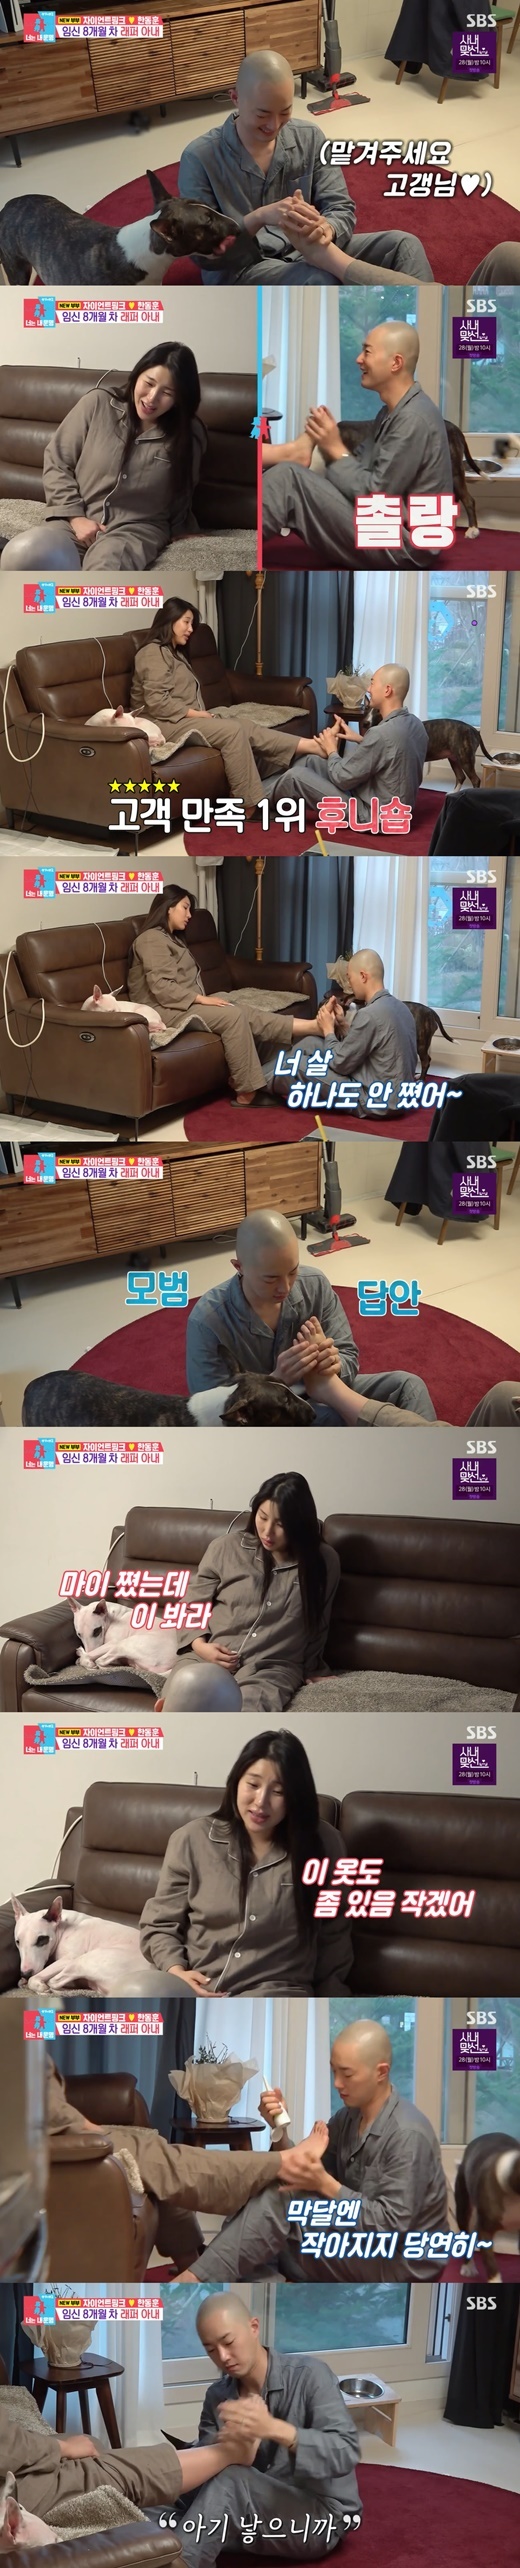 Rapper Giant Pink first unveiled his daily life with his 1-year-old husband.On SBS Same Bed, Different Dreams 22 - You Are My Destiny, which was broadcast on the 21st night, the daily life of Giant Pink and the restaurant businessman Han Dong-hoon, who joined the new fate couple, was drawn.Giant Pink, who entered the 8-month pregnancy on the day, said, Can you massage my feet? He said, I feel swollen.It is hard to sit now, he said, Han Dong-hoon gave a massage with a foot cream.Giant Pink expressed satisfaction with the glitzy hand, saying, I think I came to get a massage in another country, and it hurts so much because I have been swollen these days.I am a lot of money, he asked suddenly.Han Dong-hoon offered The Good Detective answer, saying, No? You dont have any flesh. But Giant Pink said, Its a lot. Look at this.Ill be small in a while, but how about getting fat and seeing this?Han Dong-hoon replied, It is natural to be small in the original month. I think I should live hard. Because I eat too much?I was impressed by Giant Pinks words, No, because I have a baby.On the other hand, Kim Gura, who watched it, acknowledged him as a good husband.